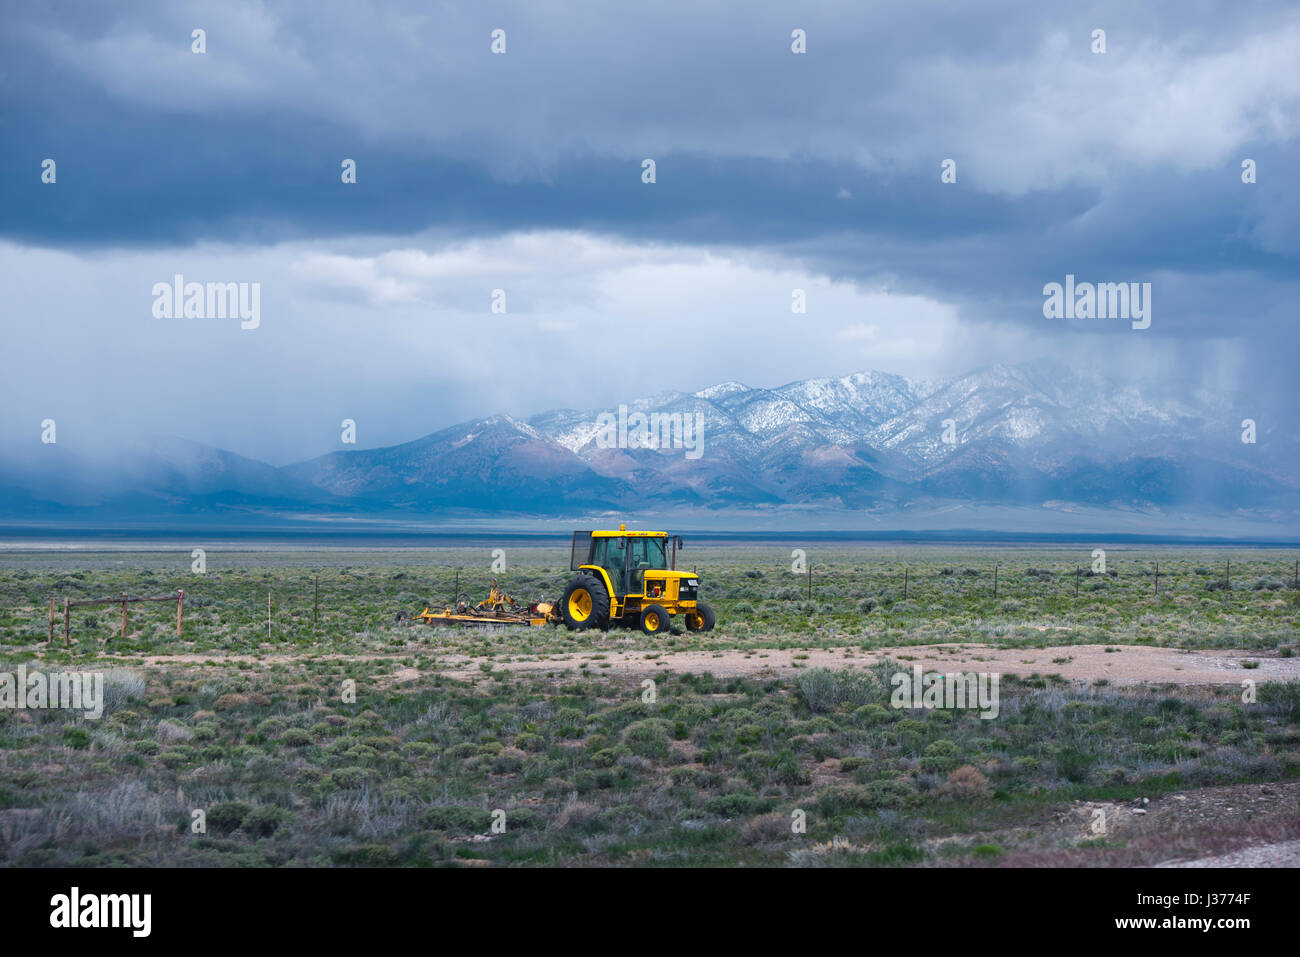 Yellow tractor with a plow working in the field in the middle of Nevada, cultivating land for growing food plants, framed by a ridge of high mountains Stock Photo